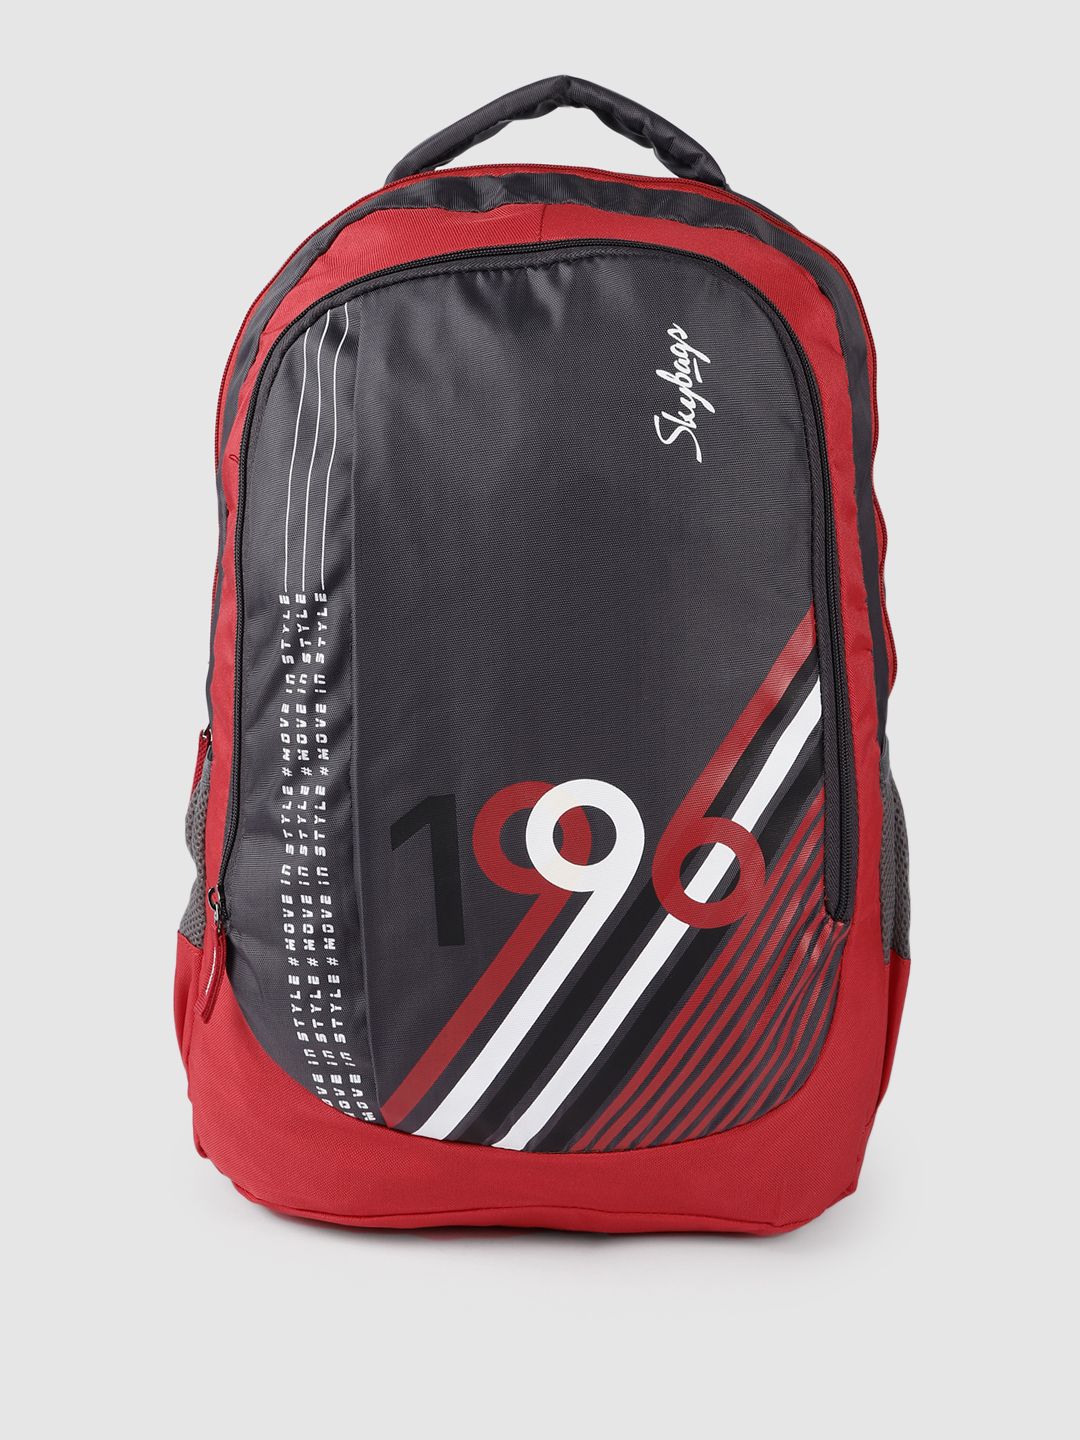 Skybags Unisex Black & Red Graphic Backpack Price in India